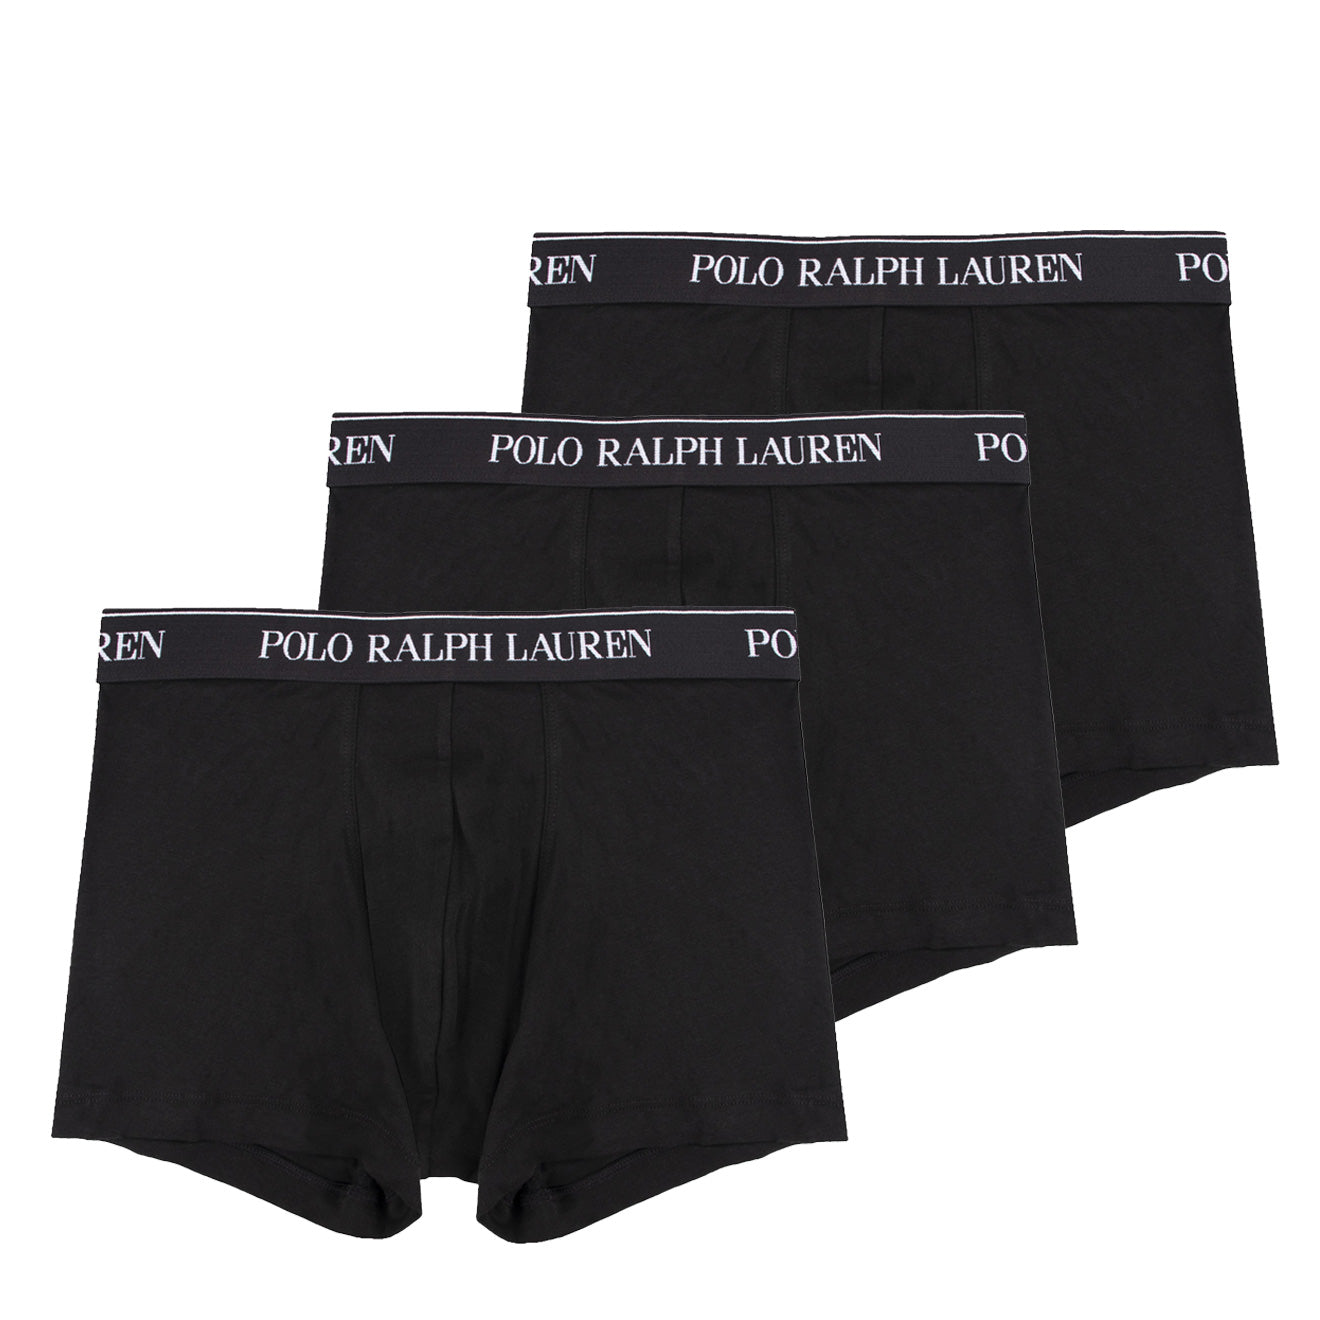 Polo Ralph Lauren Classic 3-Pack Trunks Black | The Sporting Lodge